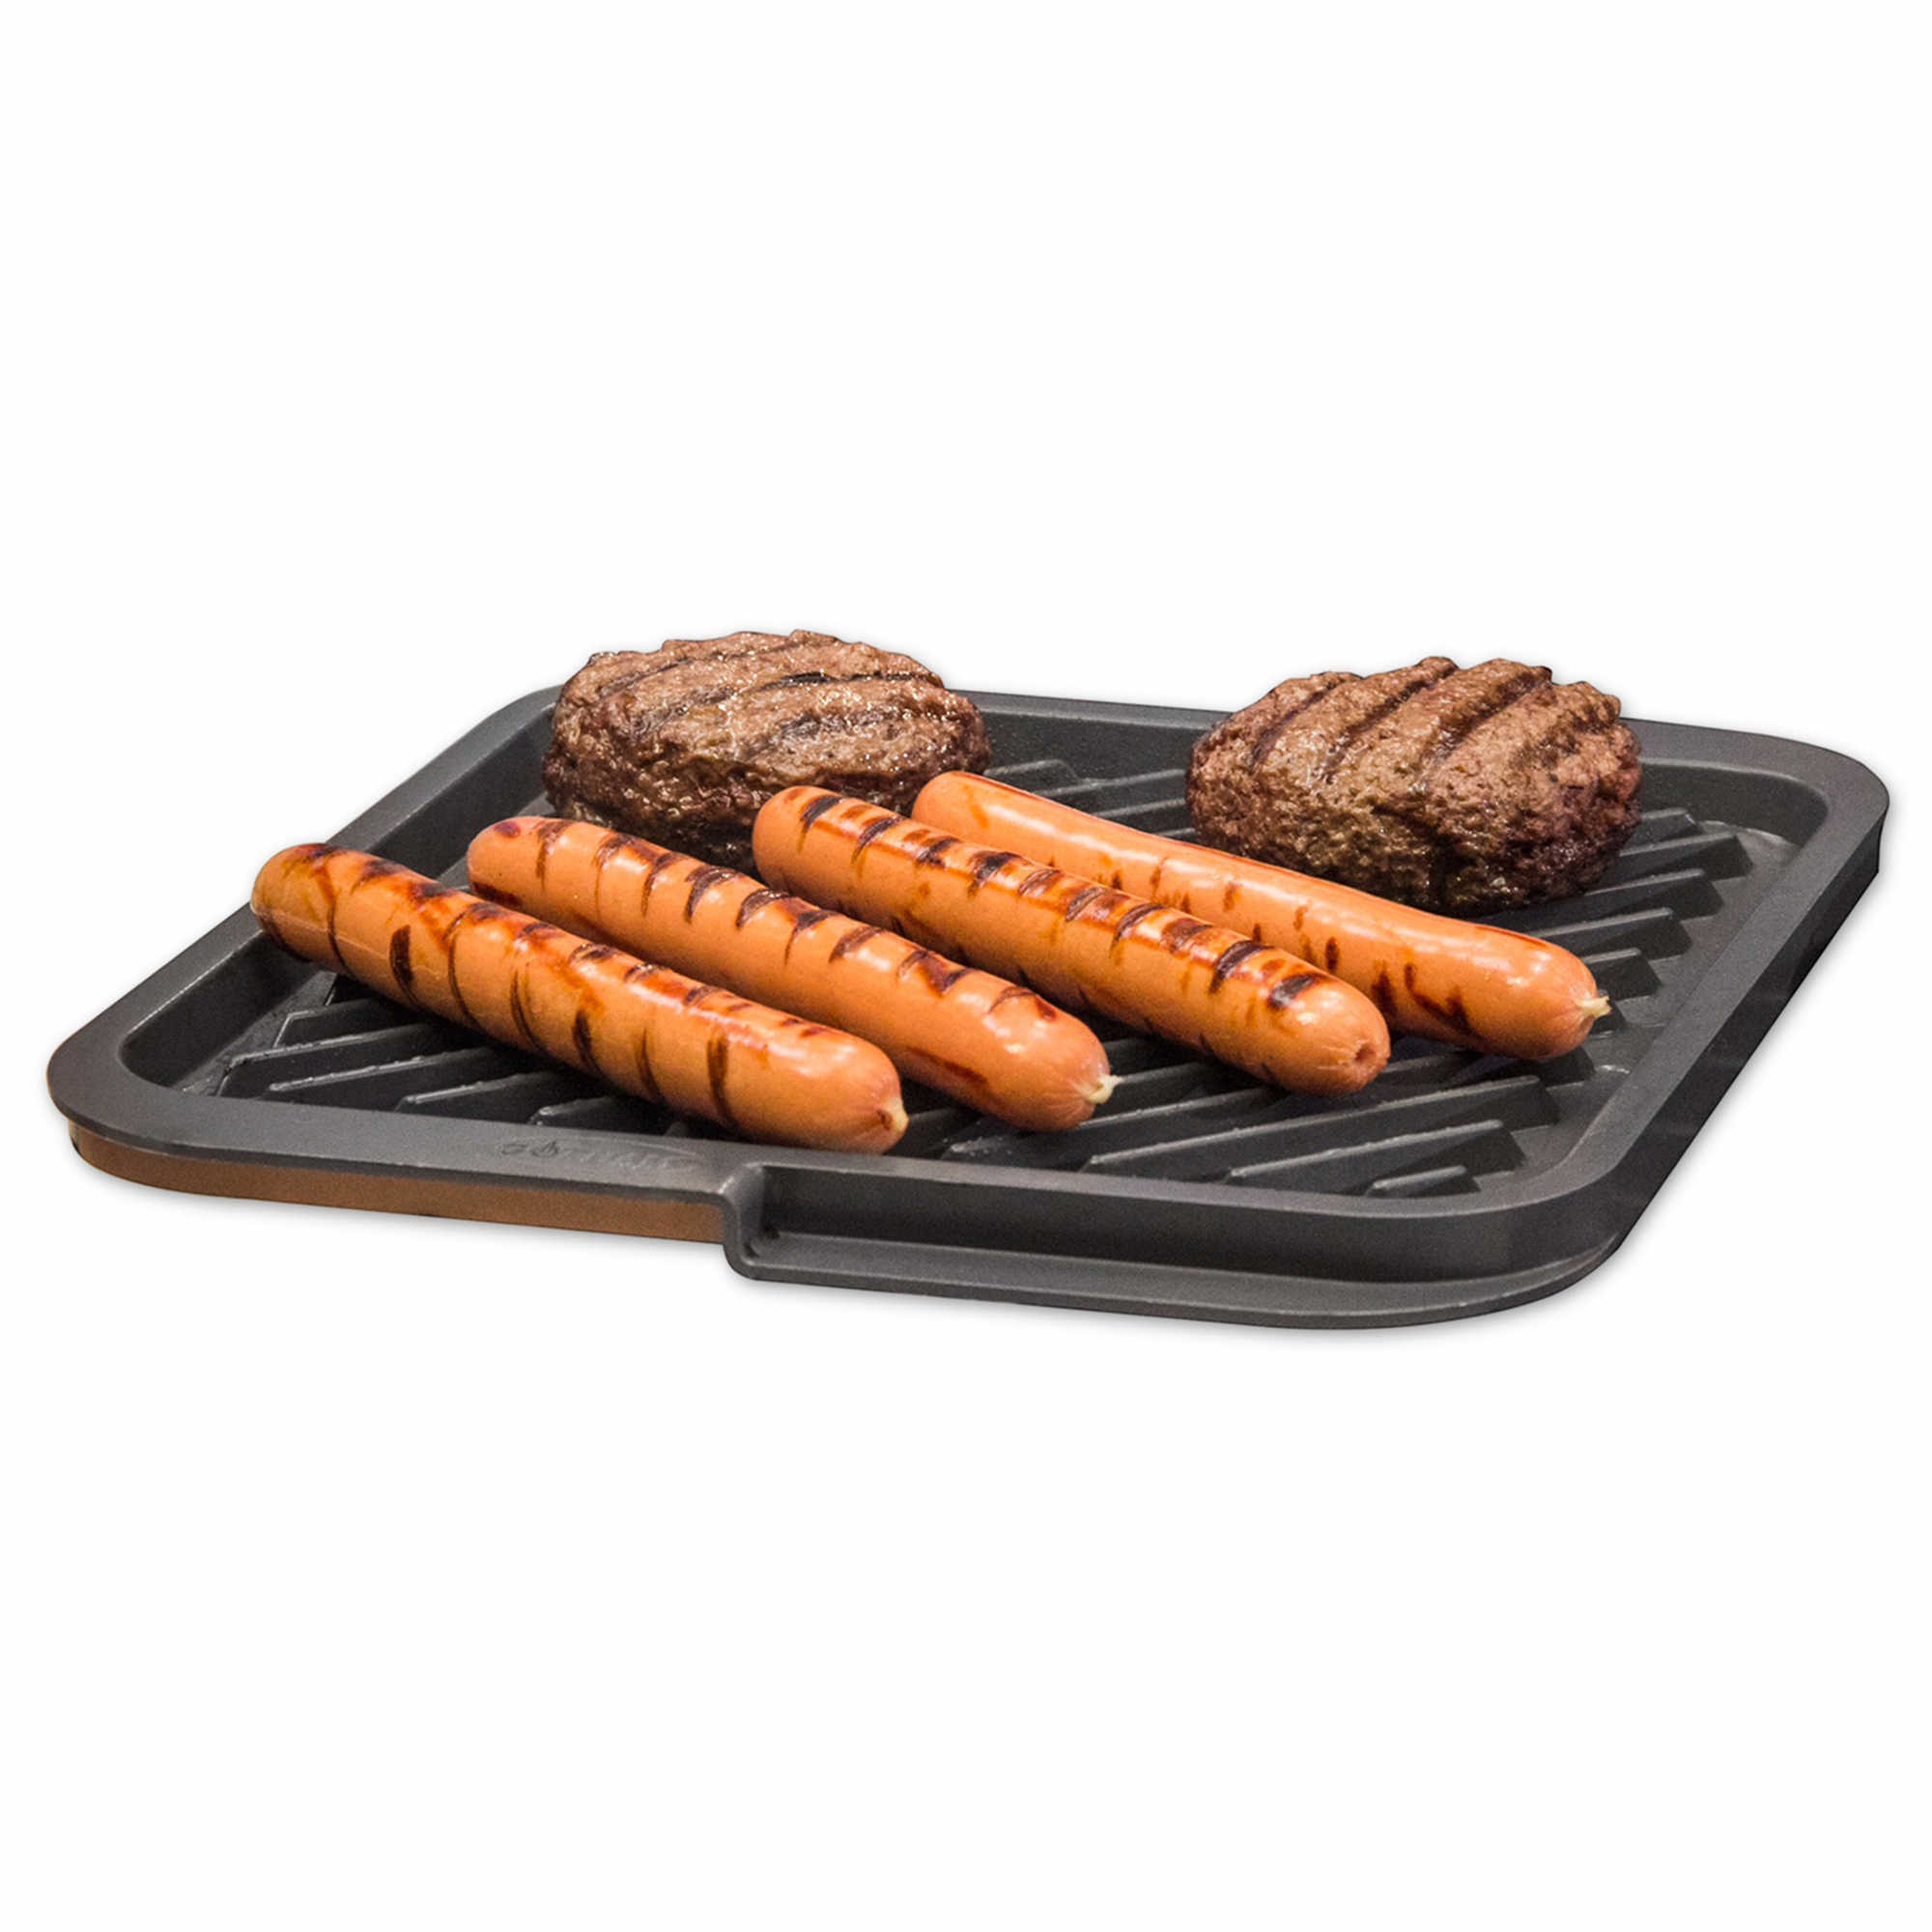 Gotham Steel XL Reversible Grill and Griddle Stovetop Pan – Family